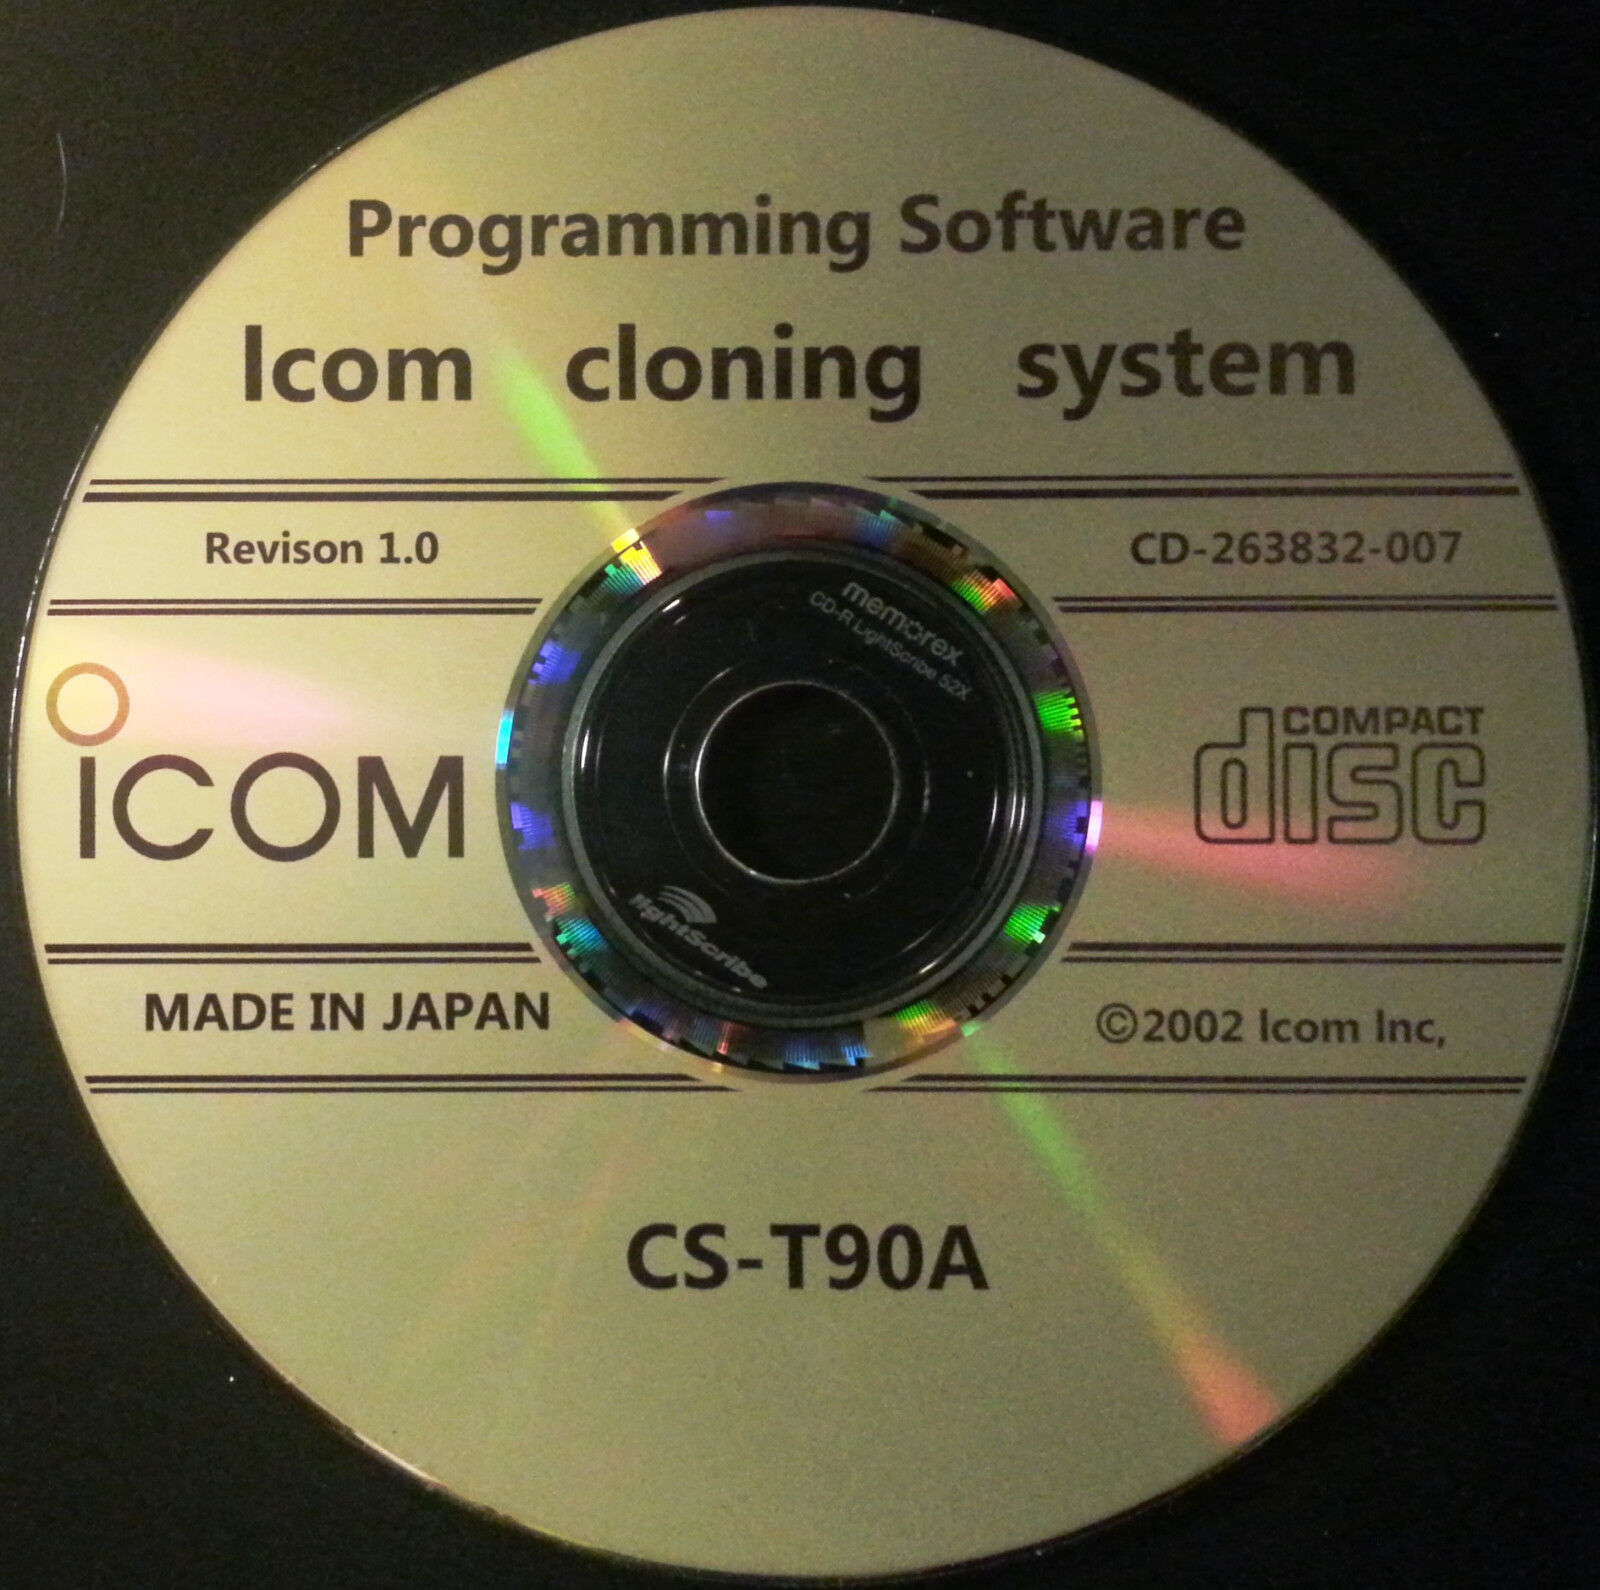 Icom CS-T90A Programming Software for IC-T90A